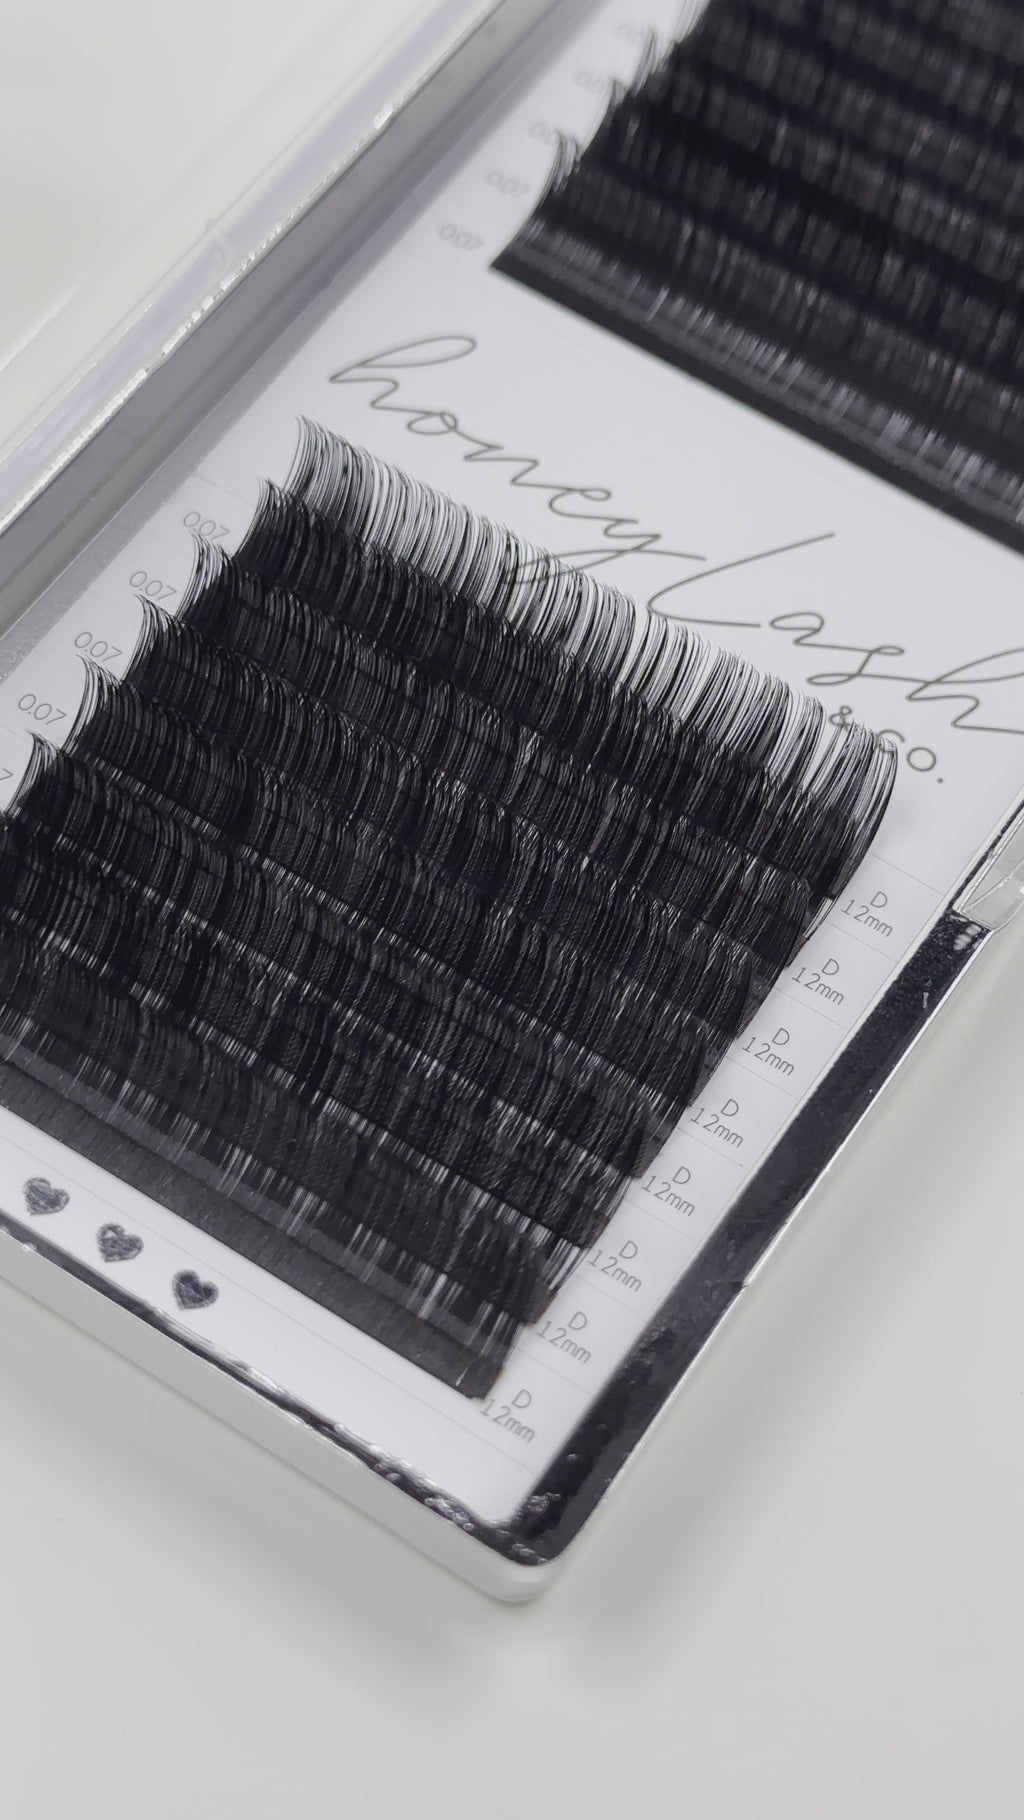 Close-up image of 0.07mm Easy to Fan Volume Lashes being expertly applied, demonstrating the technique in a step-by-step video guide.